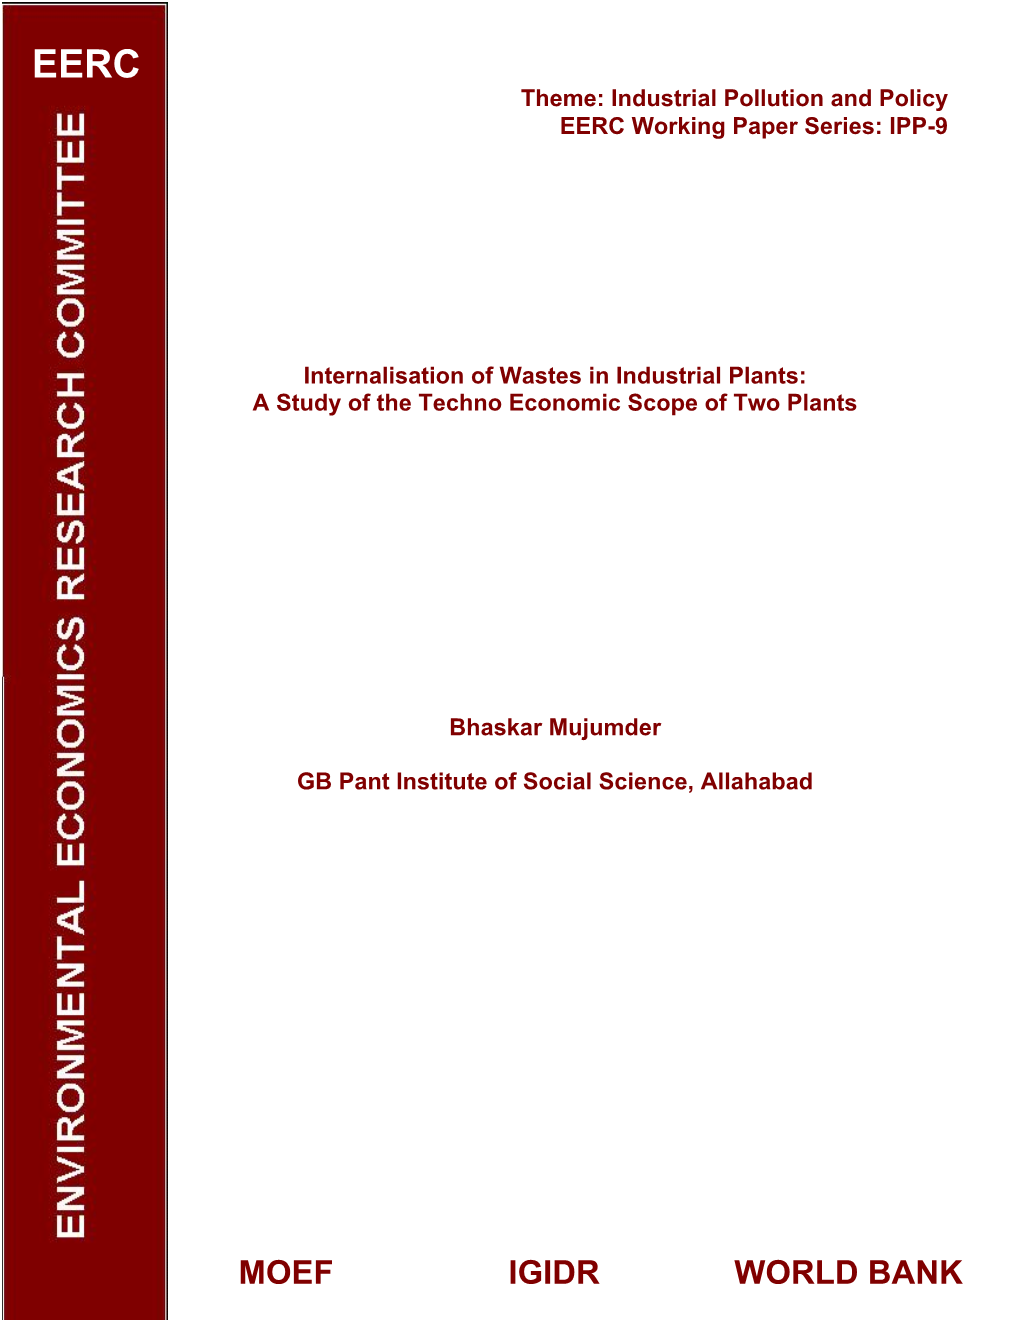 Internalisation of Wastes in Industrial Plants: a Study of the Techno Economic Scope of Two Plants